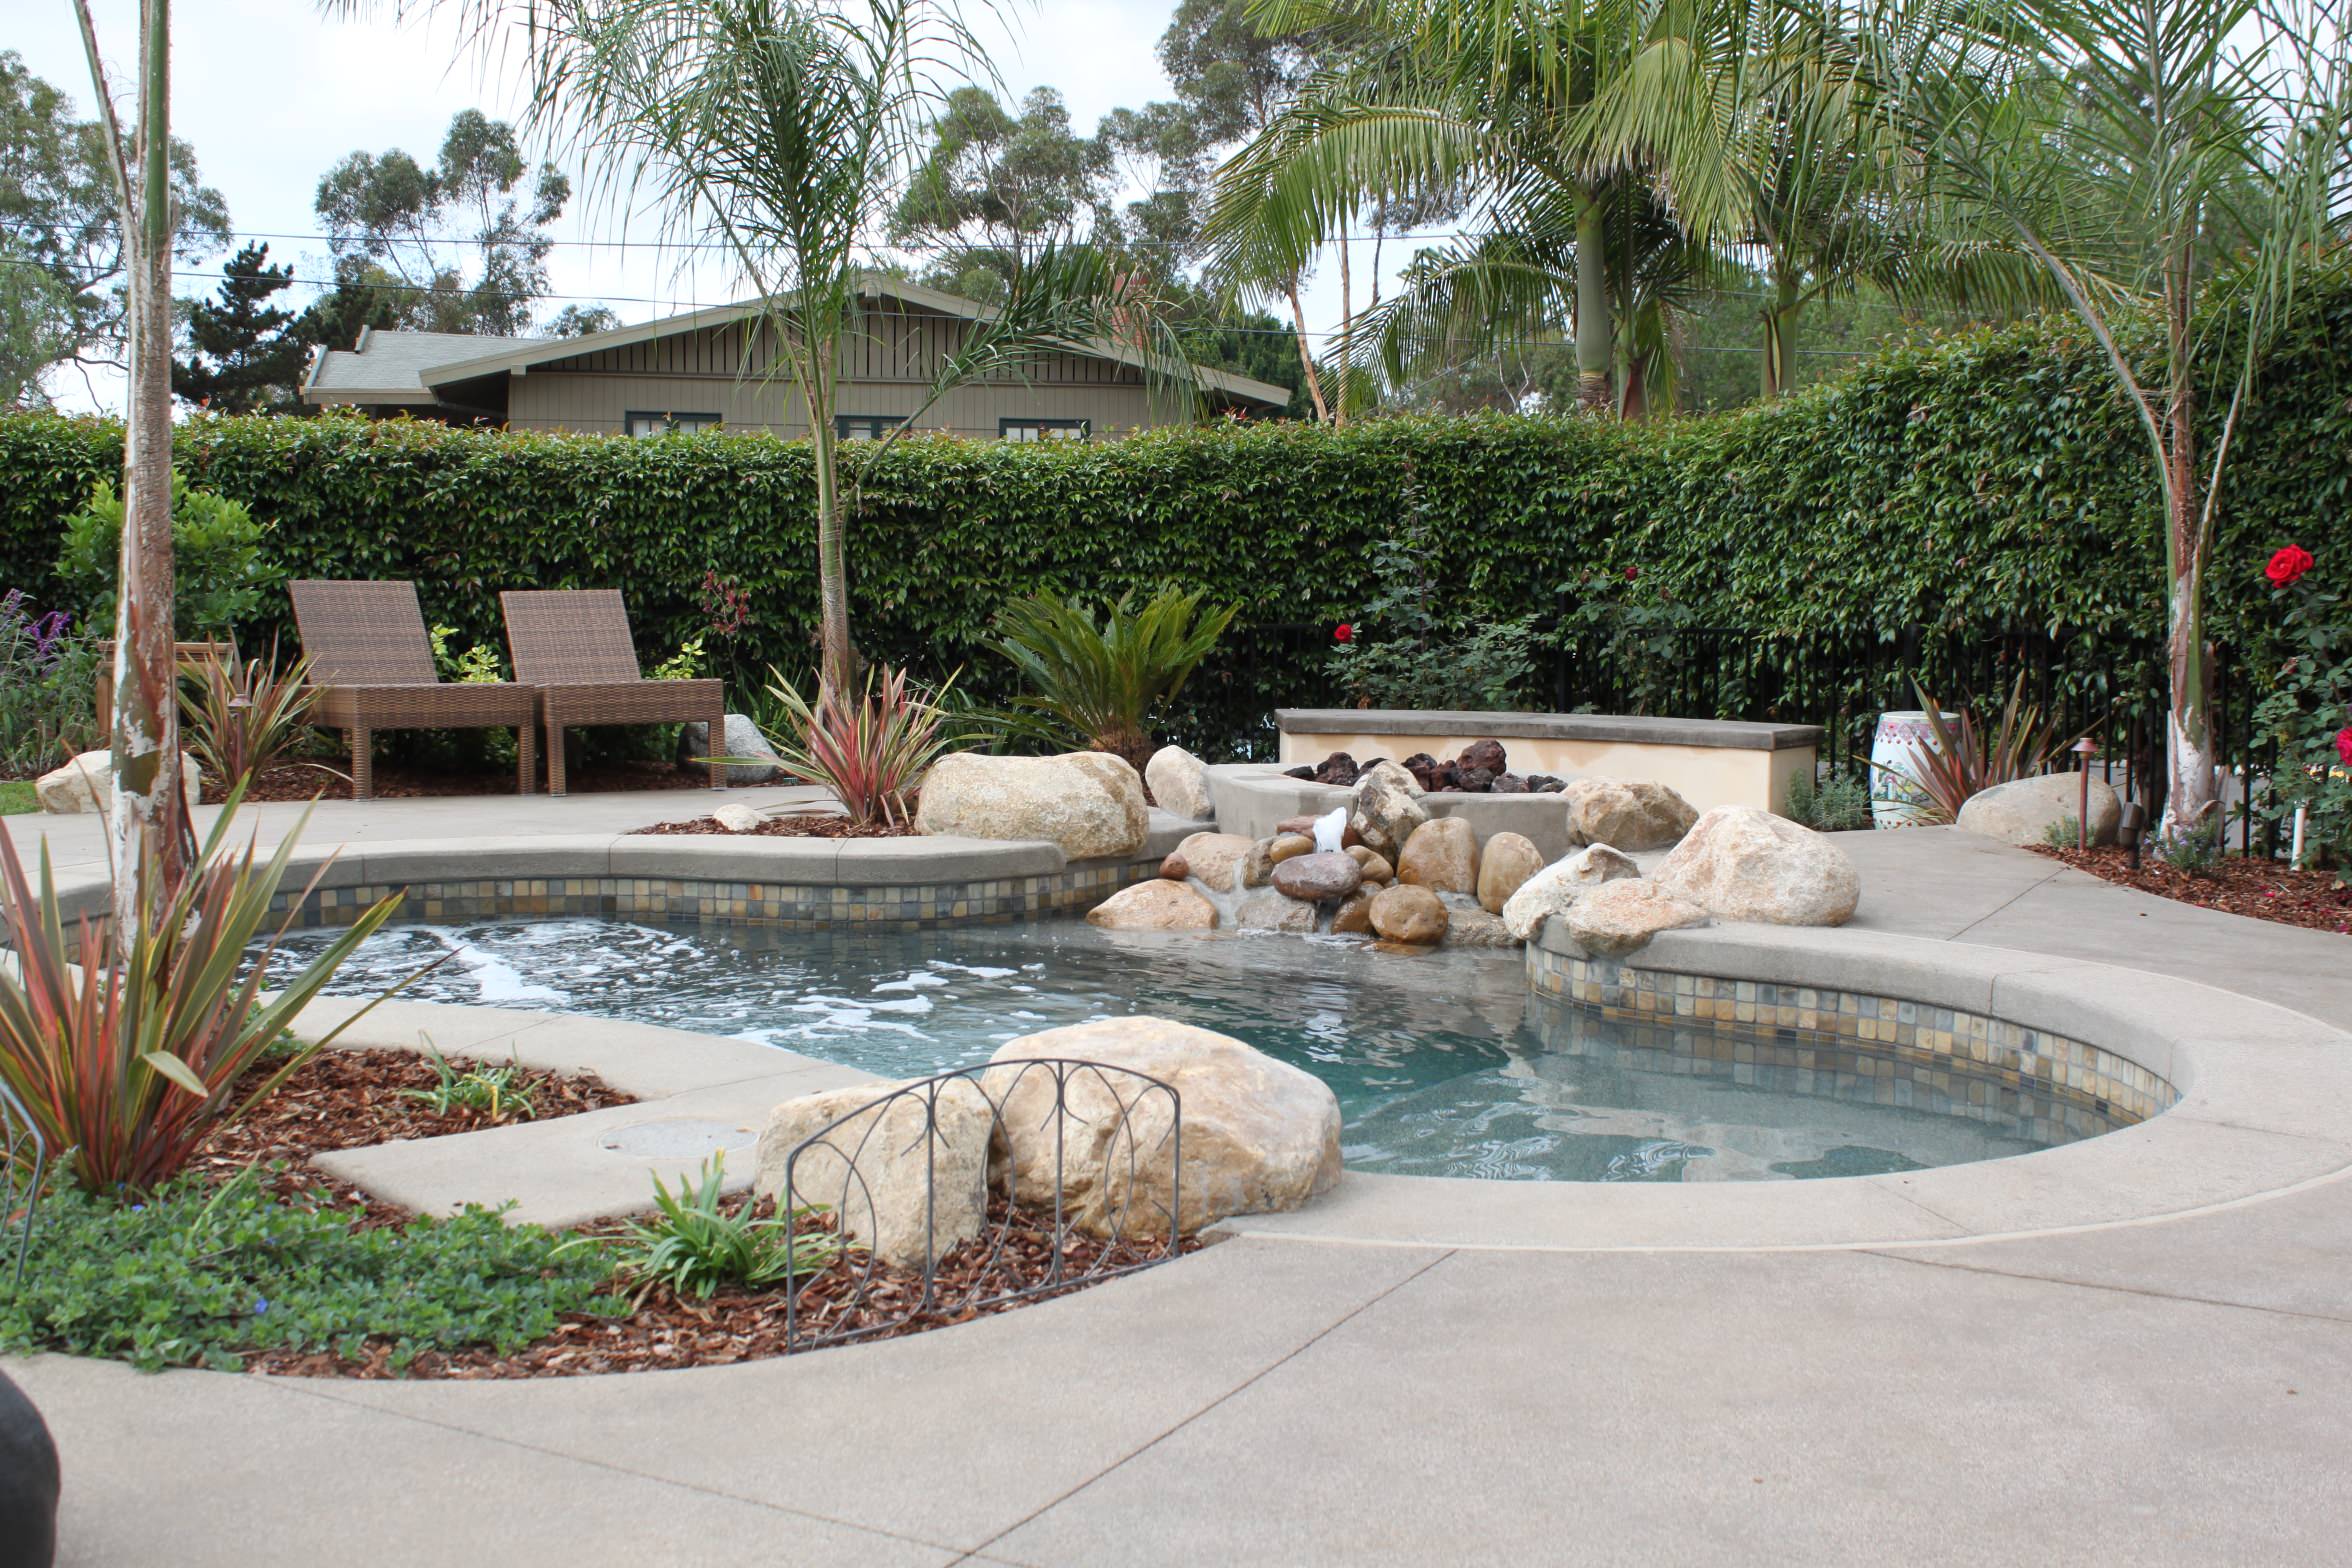 A Spool, Spa and Pool Combination with Fire Pit Above